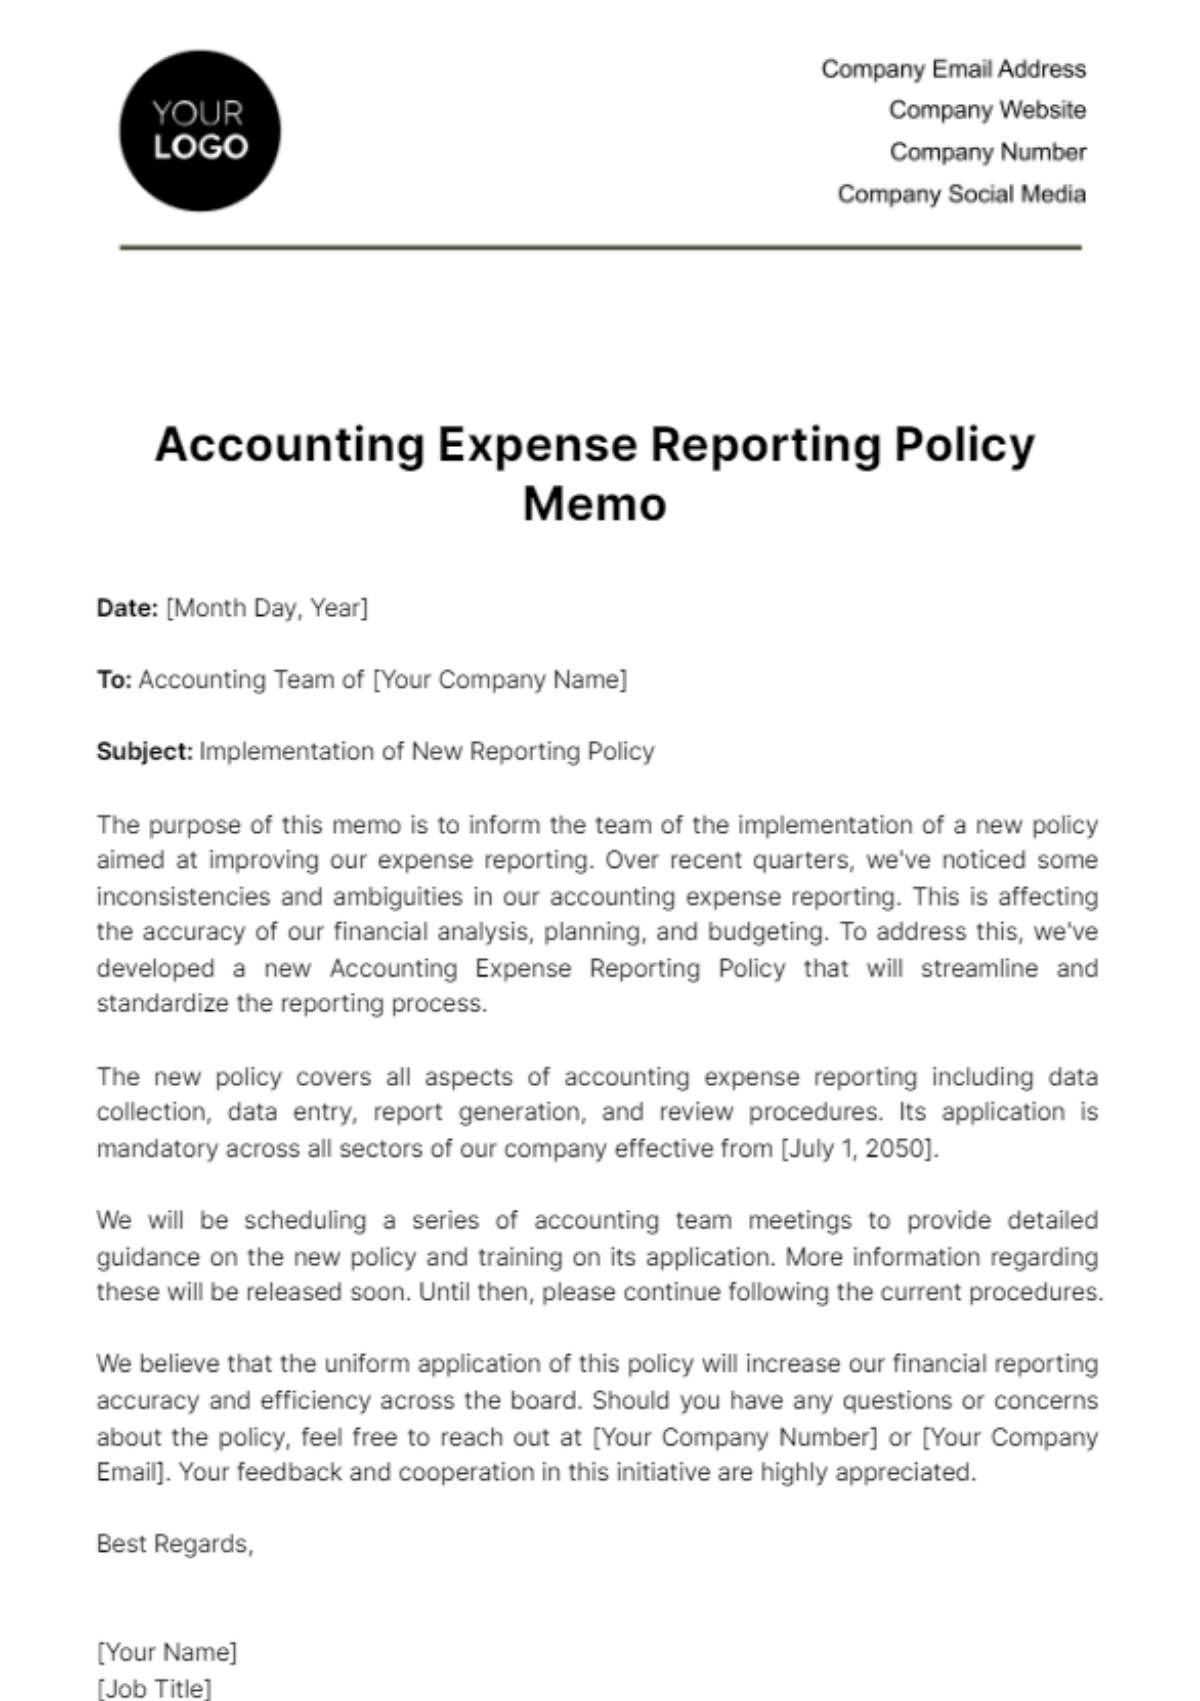 Free Accounting Expense Reporting Policy Memo Template